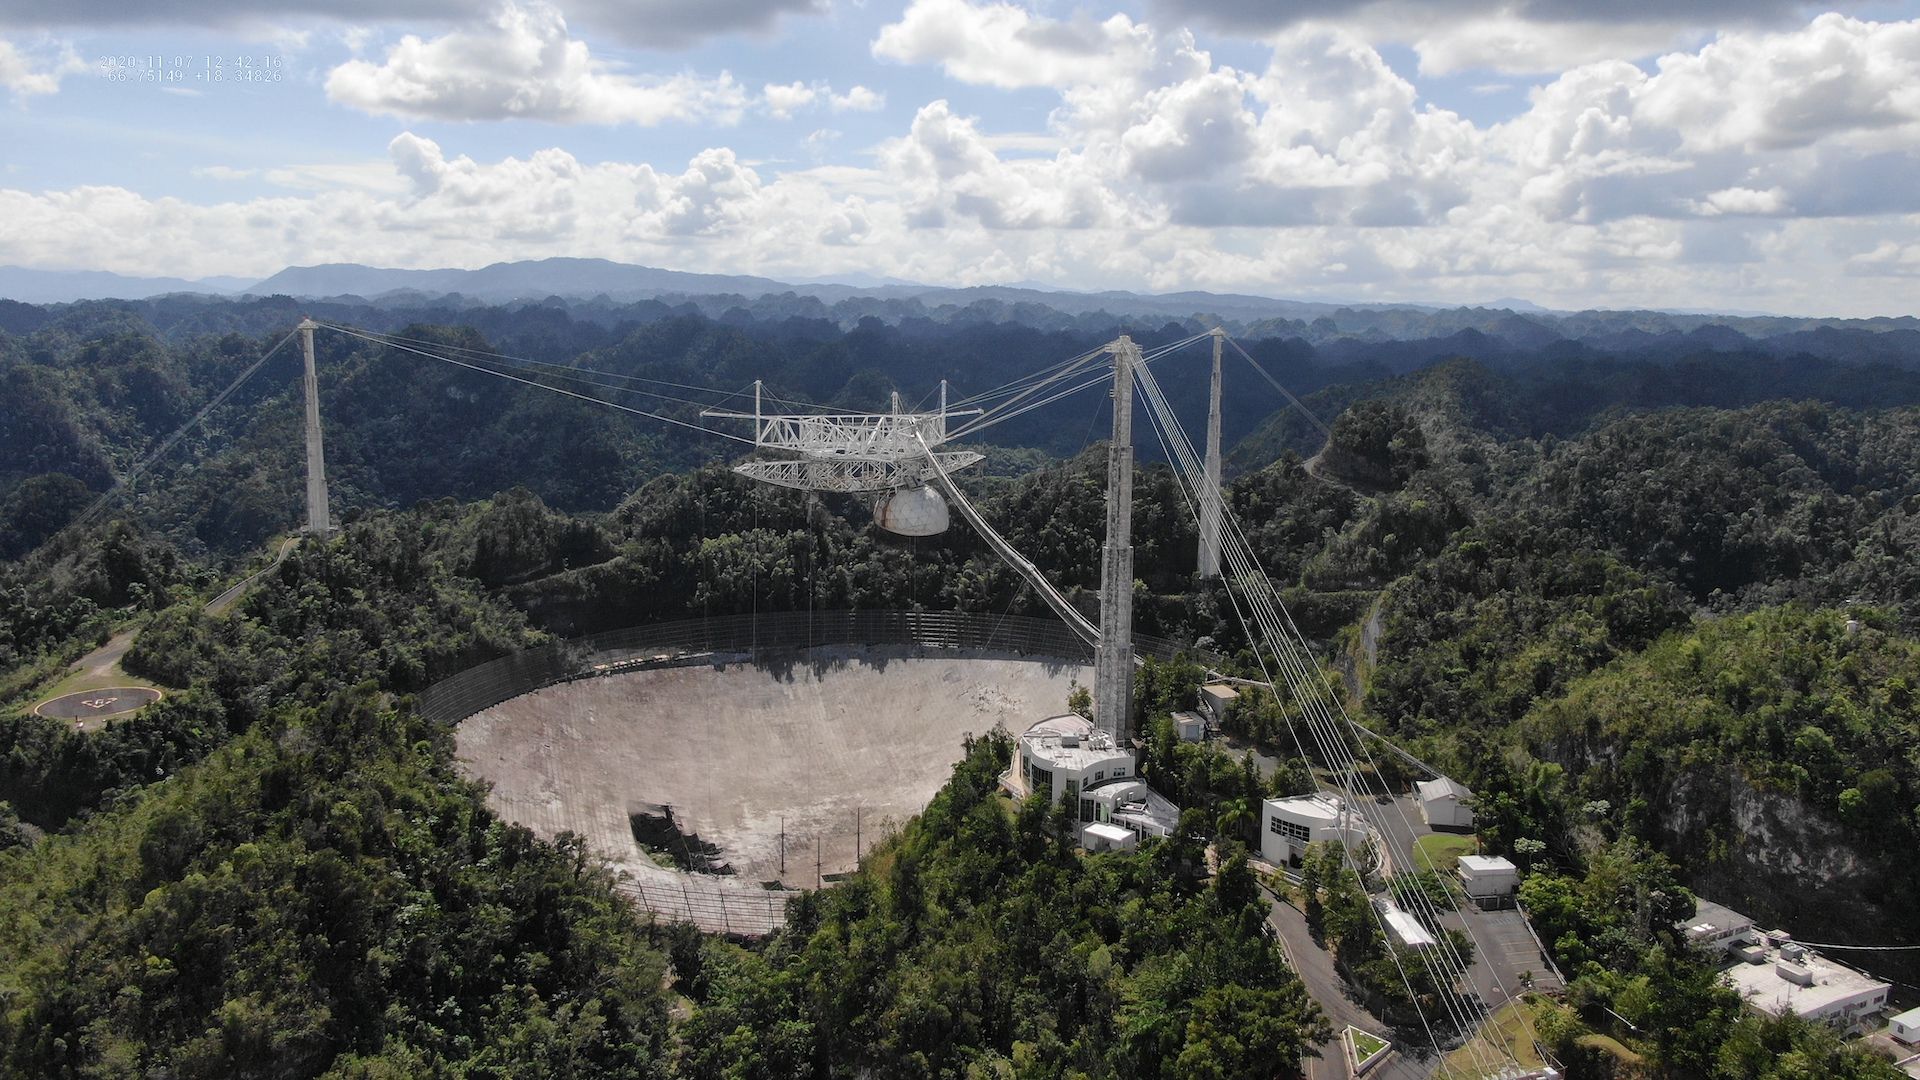 The damaged Arecibo Observatory in Puerto Rico. A telescope dish with a hole in the middle of it.